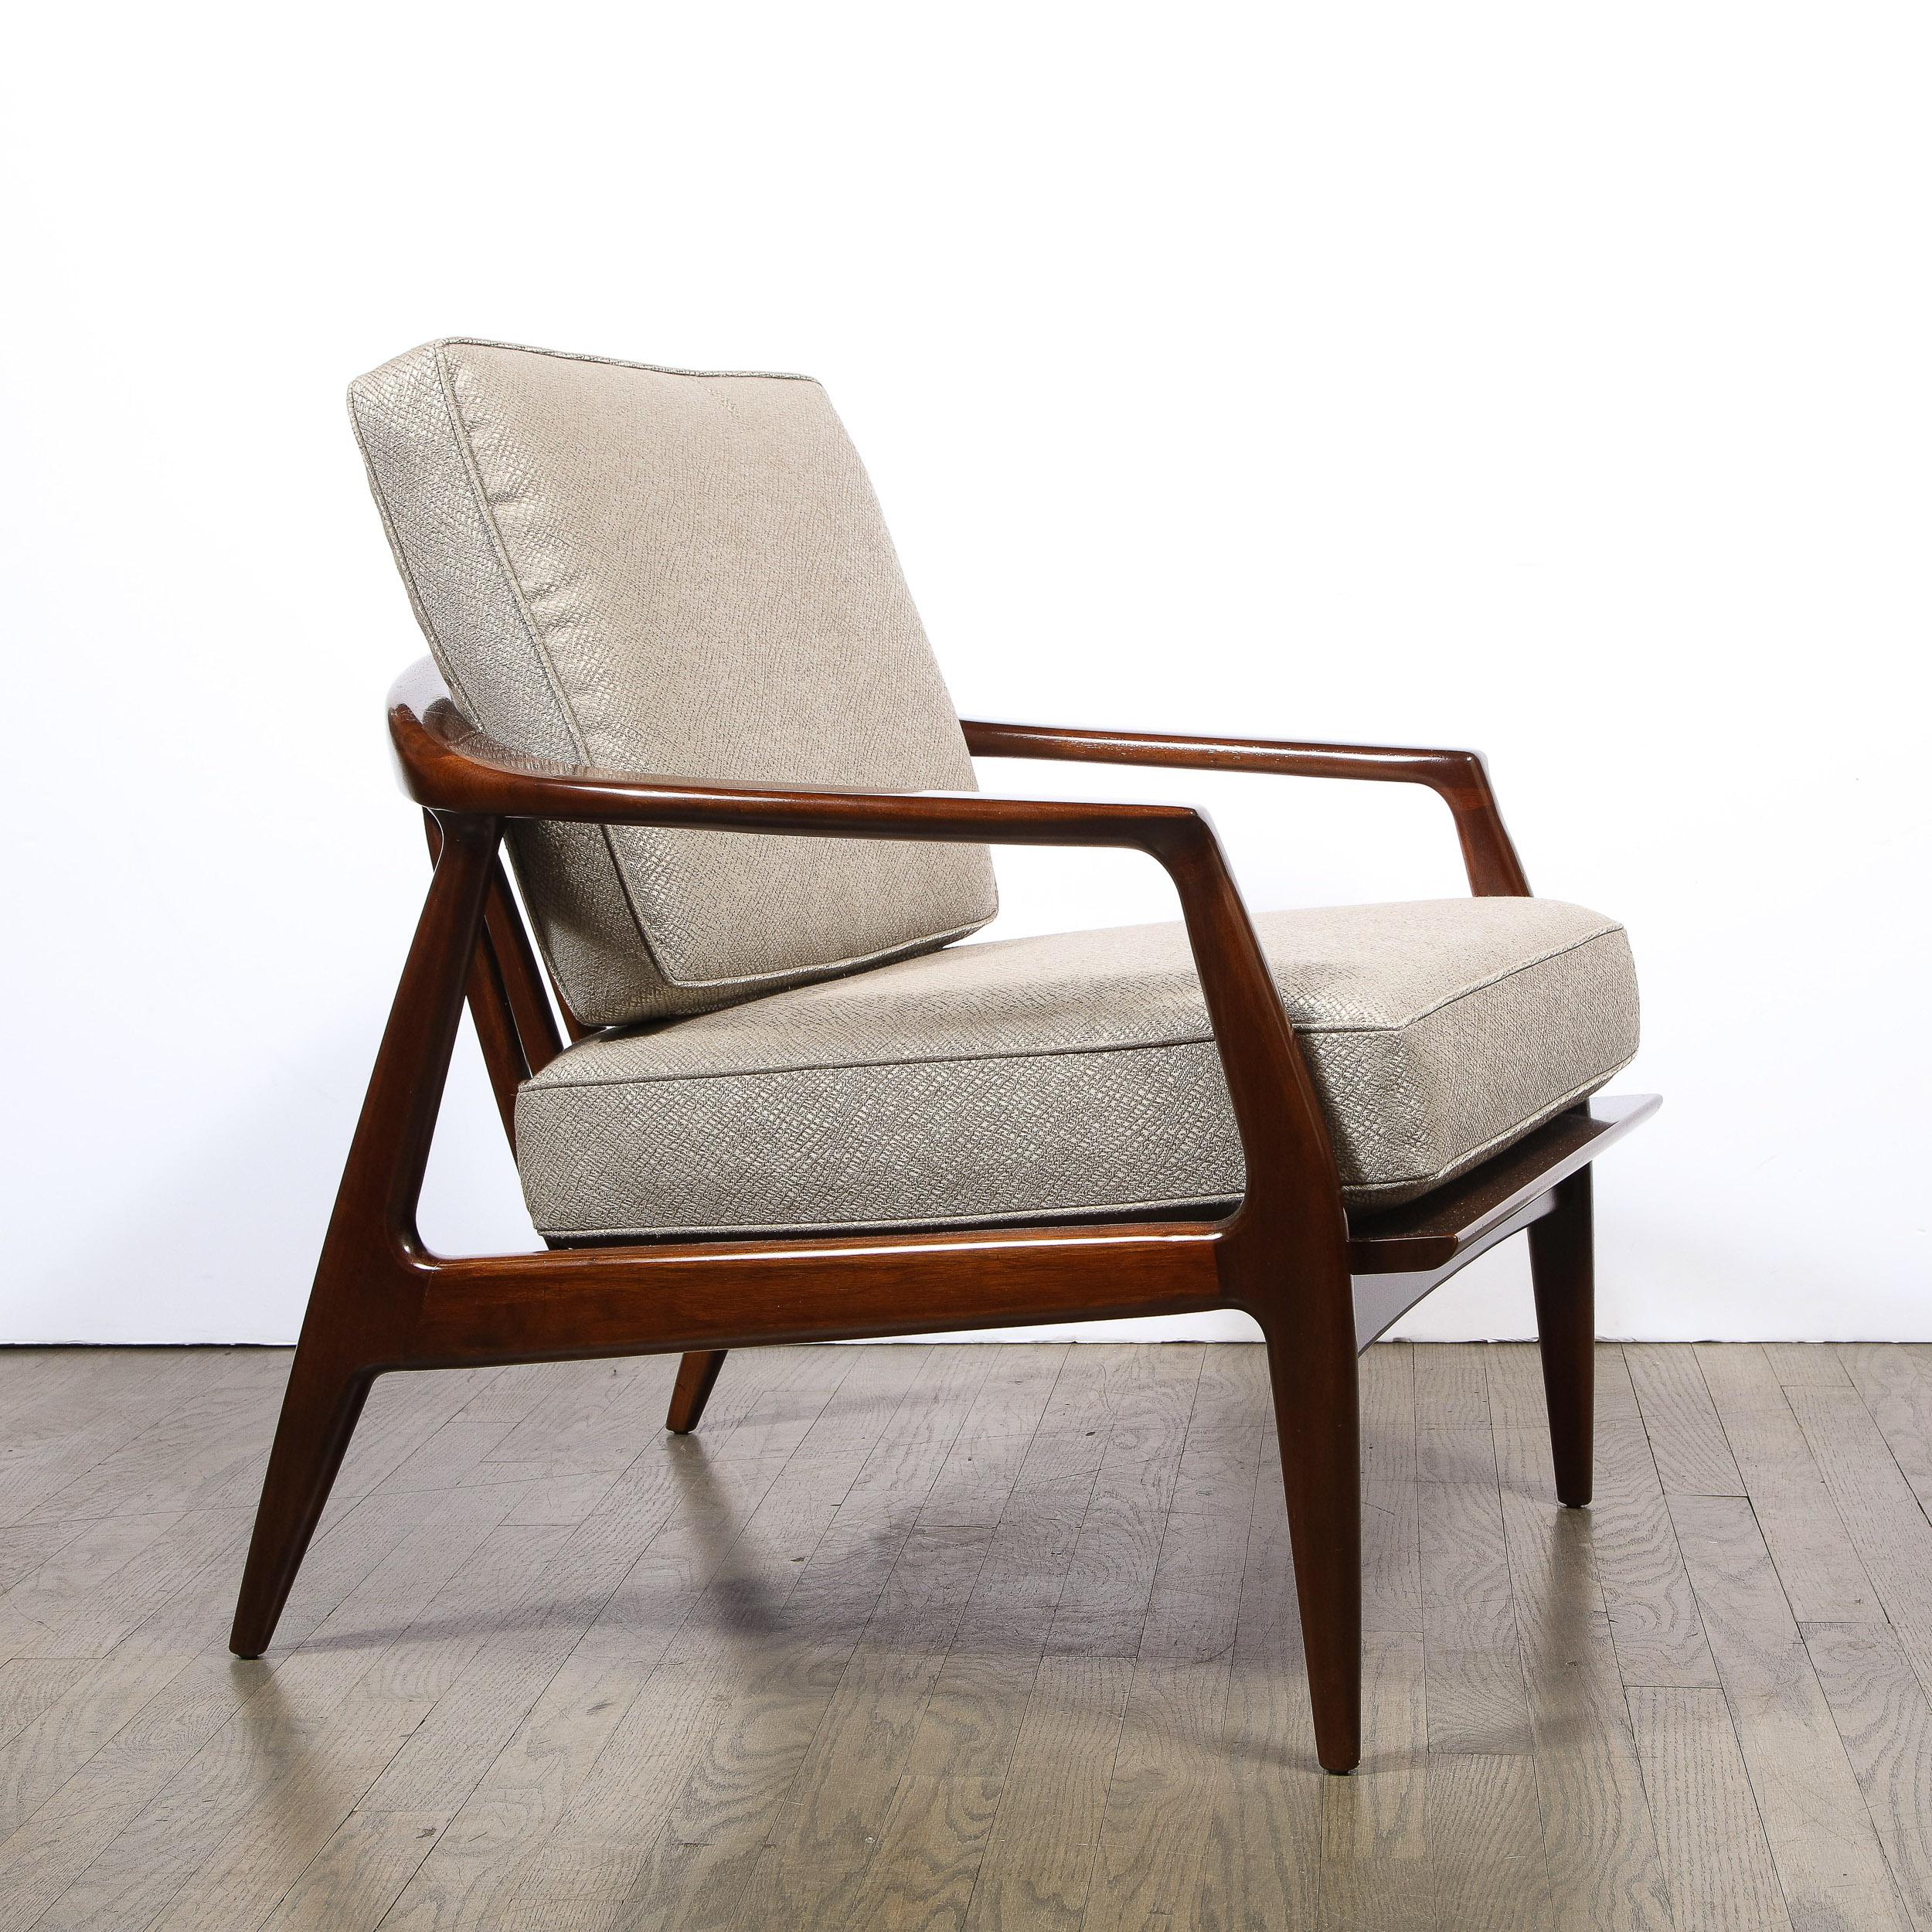 Mid-20th Century Pair of Mid Century Modern Sculptural Hand Rubbed Walnut Arm/ Lounge Chairs